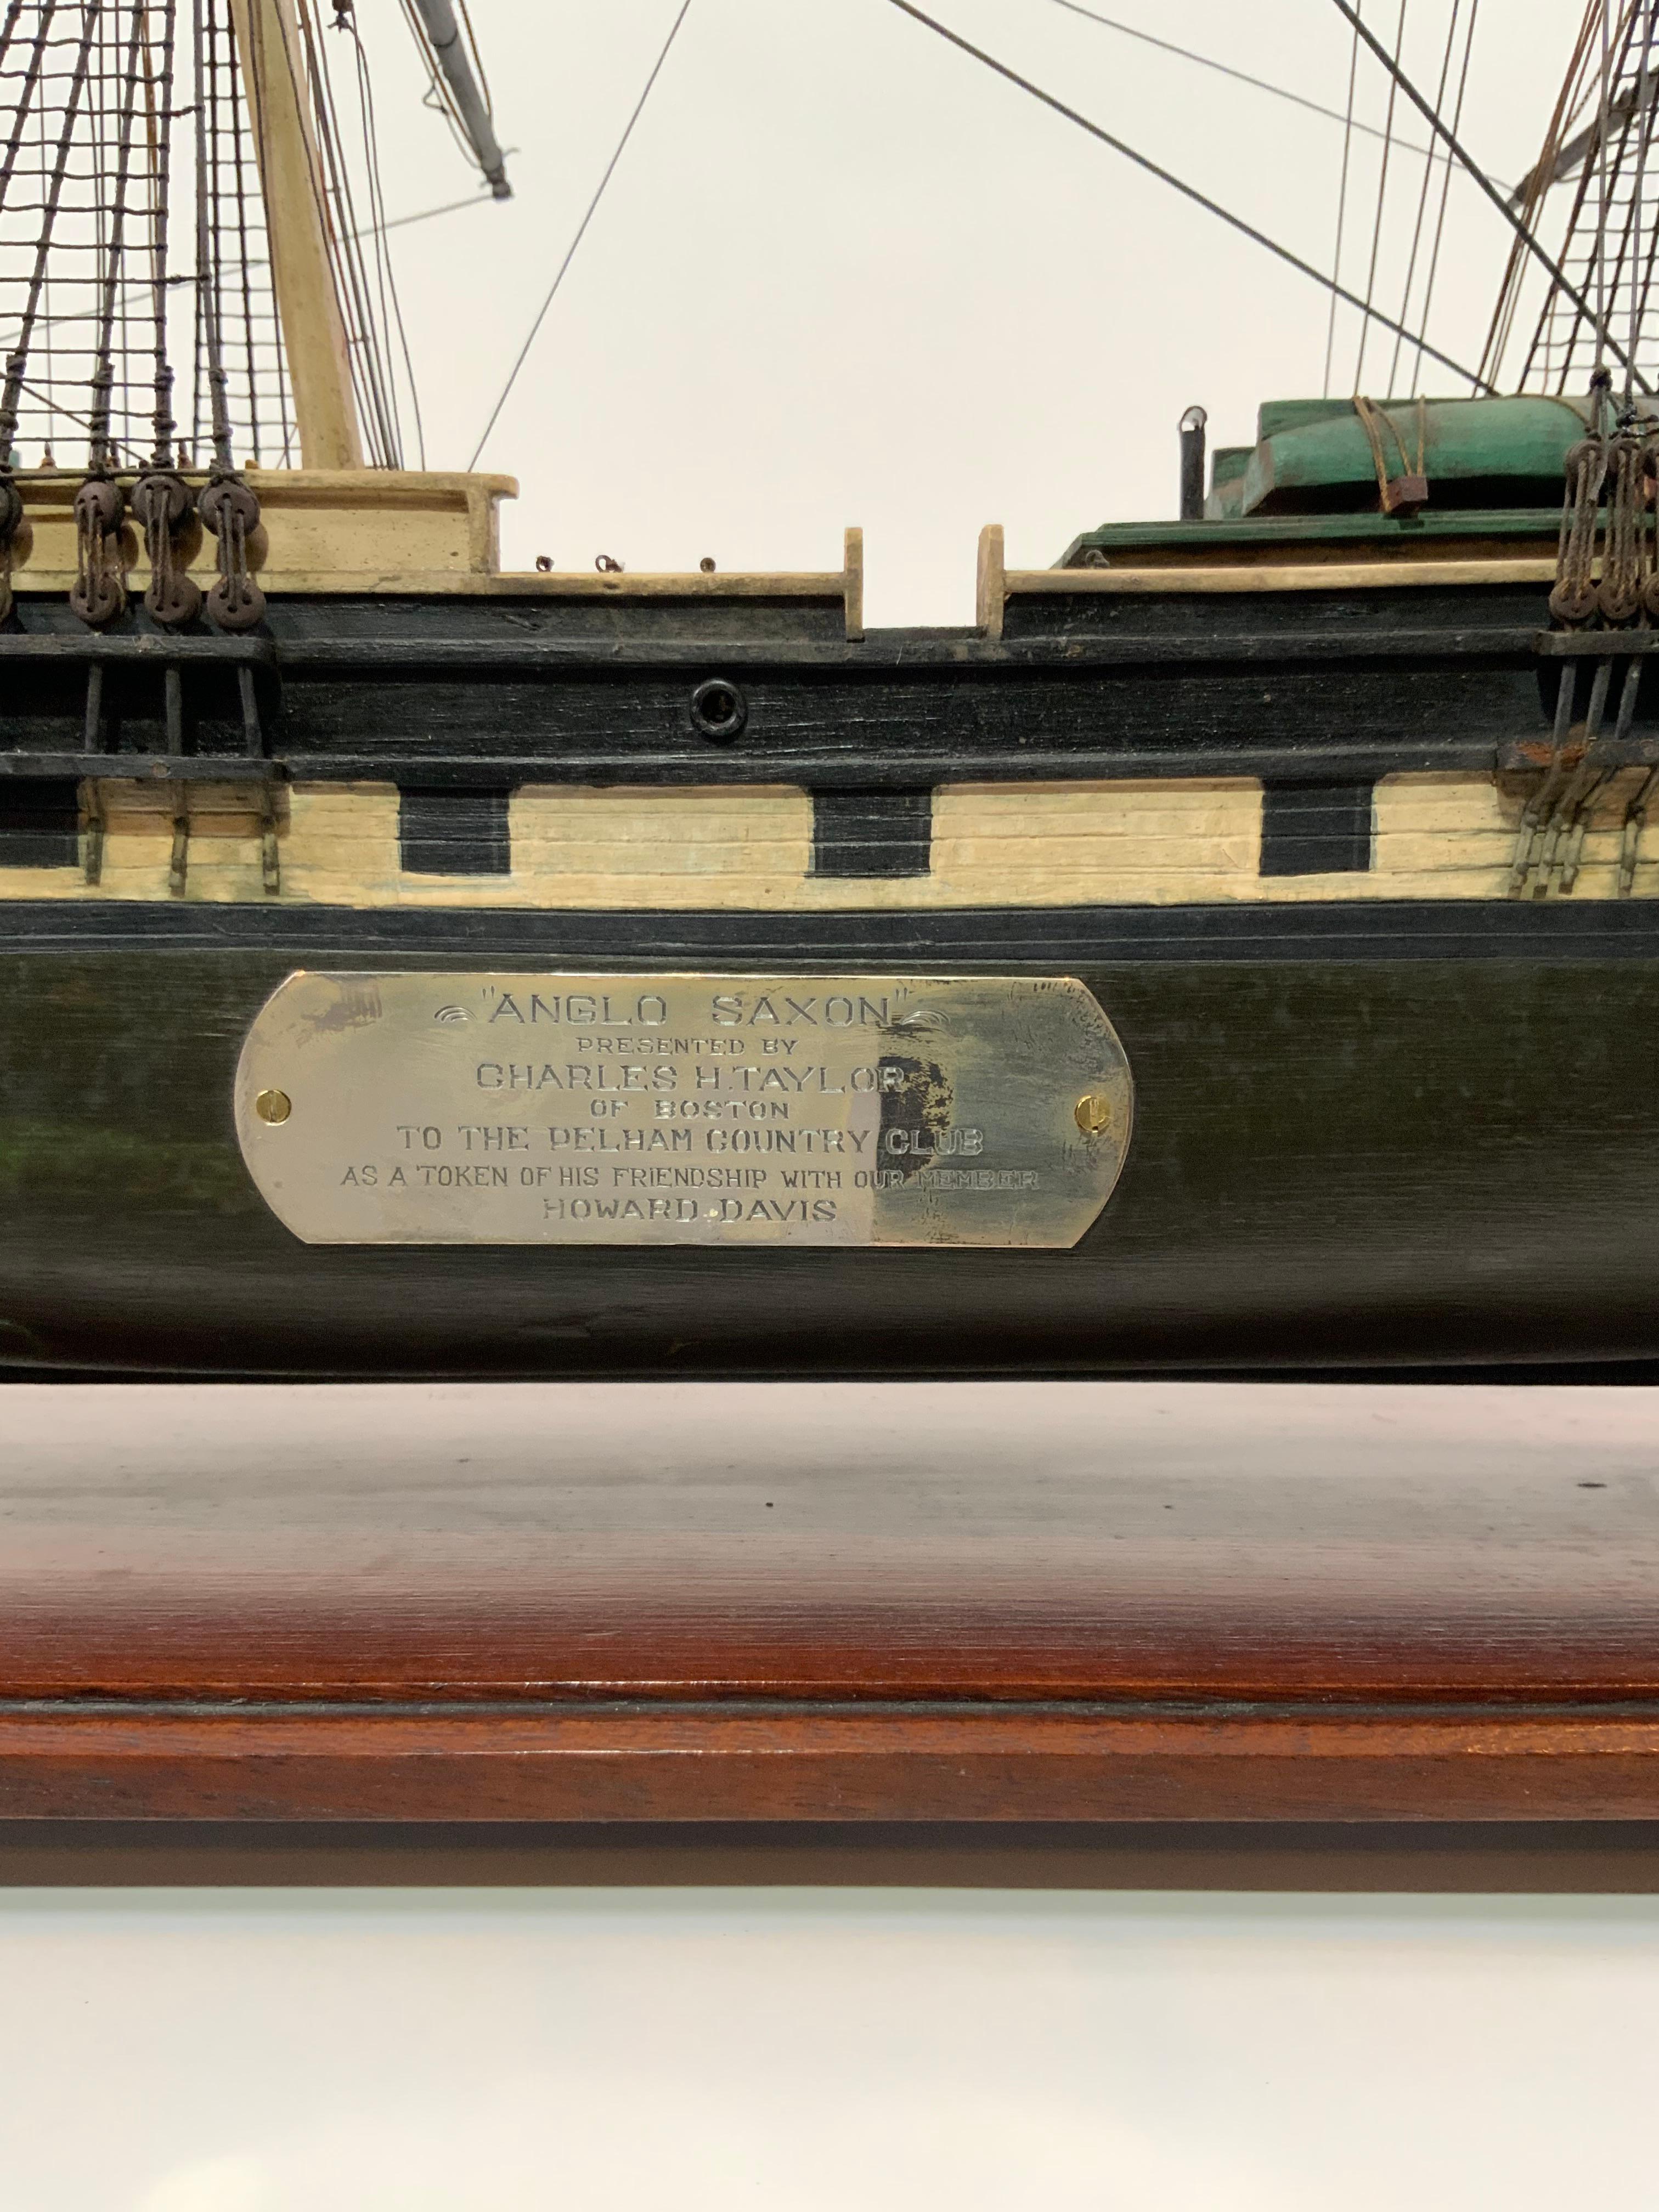 Antique ship model with provenance. This model of the packet ship “Anglo Saxon” was “presented by Charles H Taylor of Boston to the Pelham Country Club as a token of his friendship with our member Howard Davis” as written on engraved plaque. This is